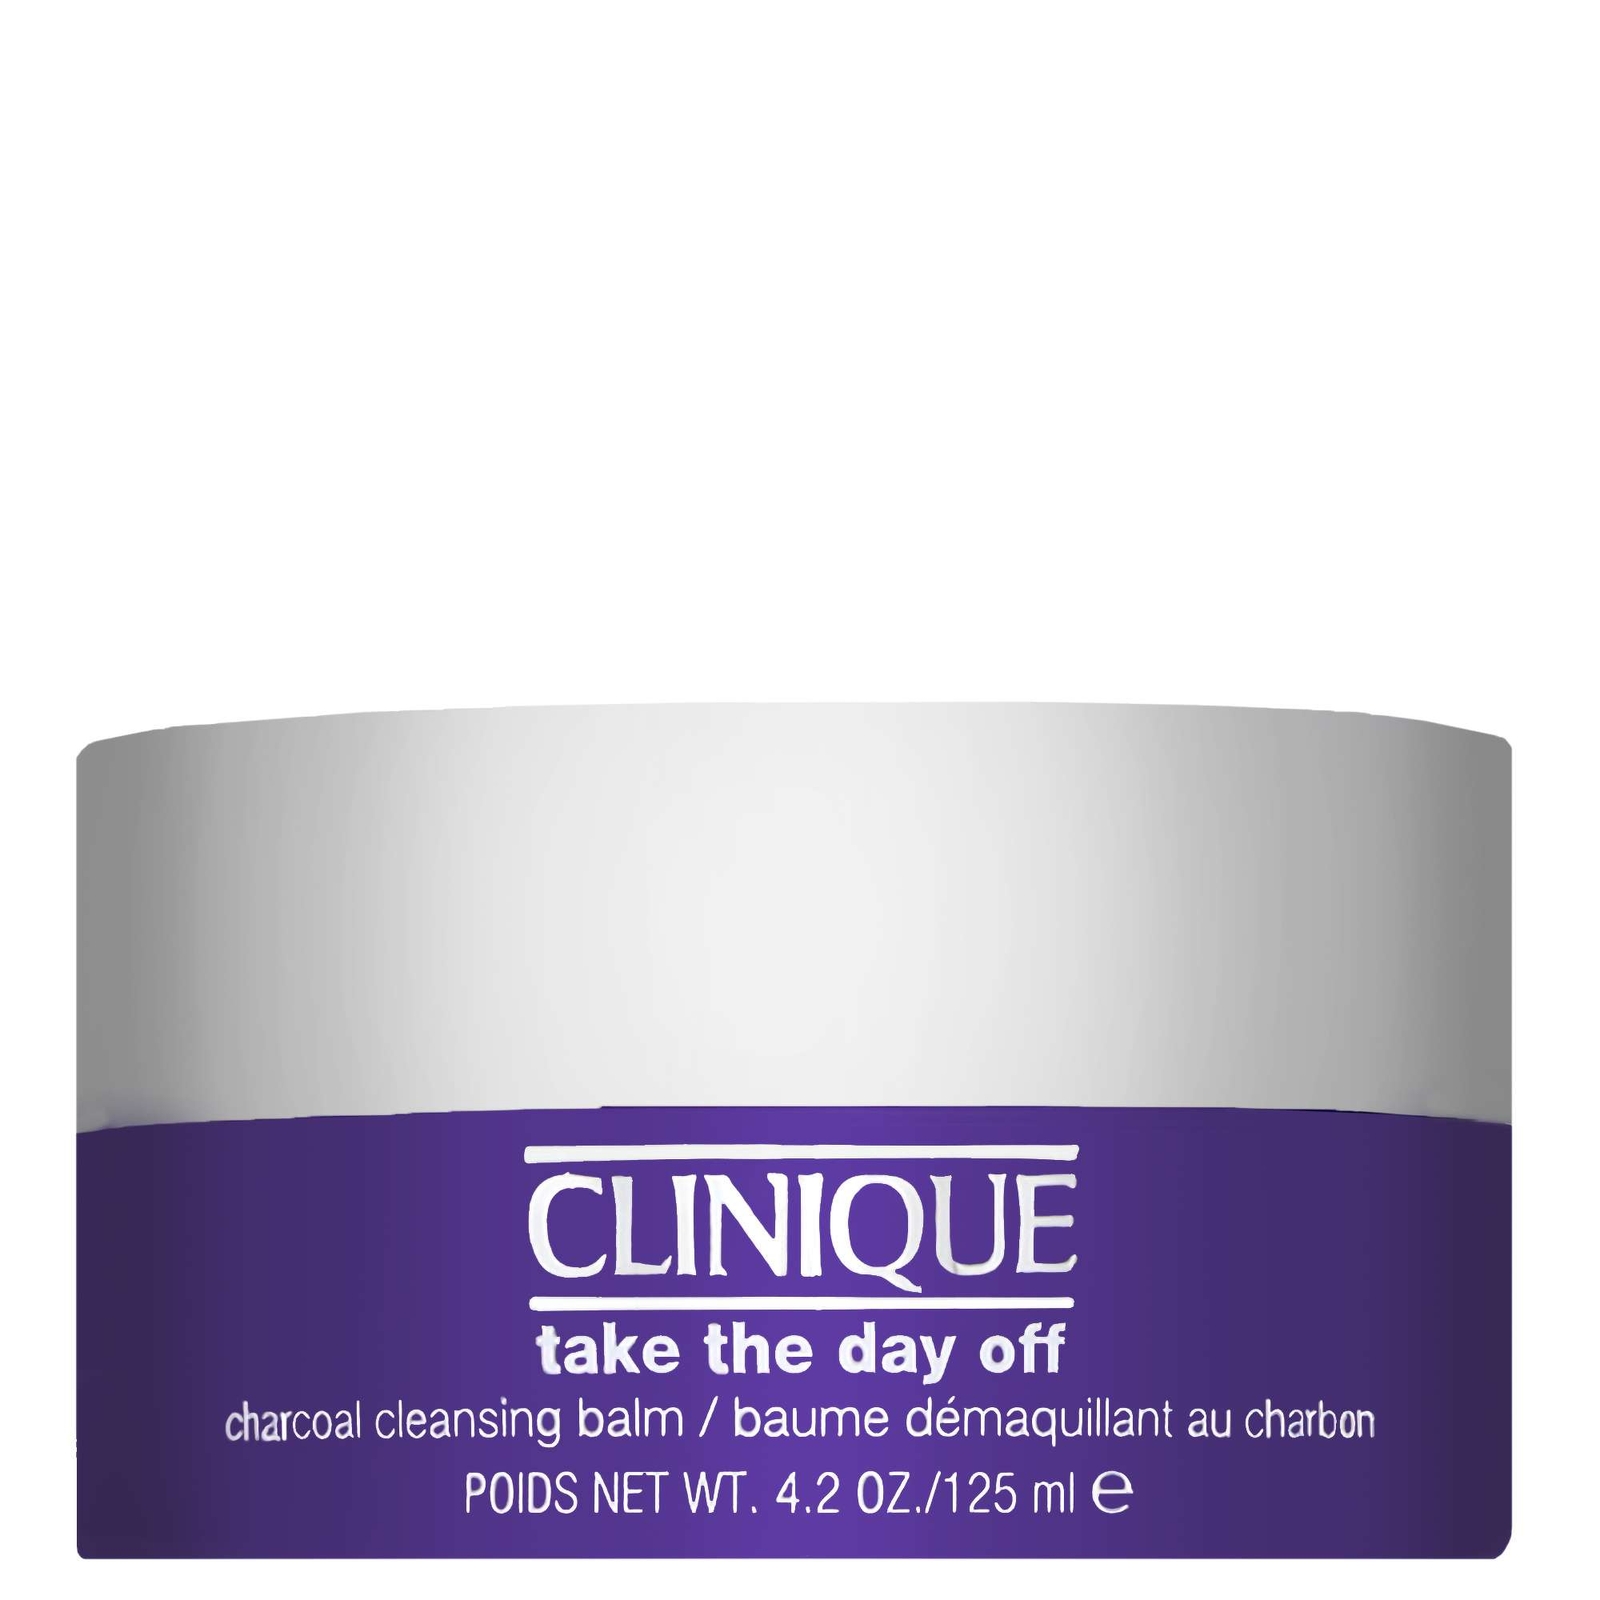 Photos - Facial / Body Cleansing Product Clinique Take The Day Off Charcoal Balm  - 125ml V6XP010000 (Various Sizes)